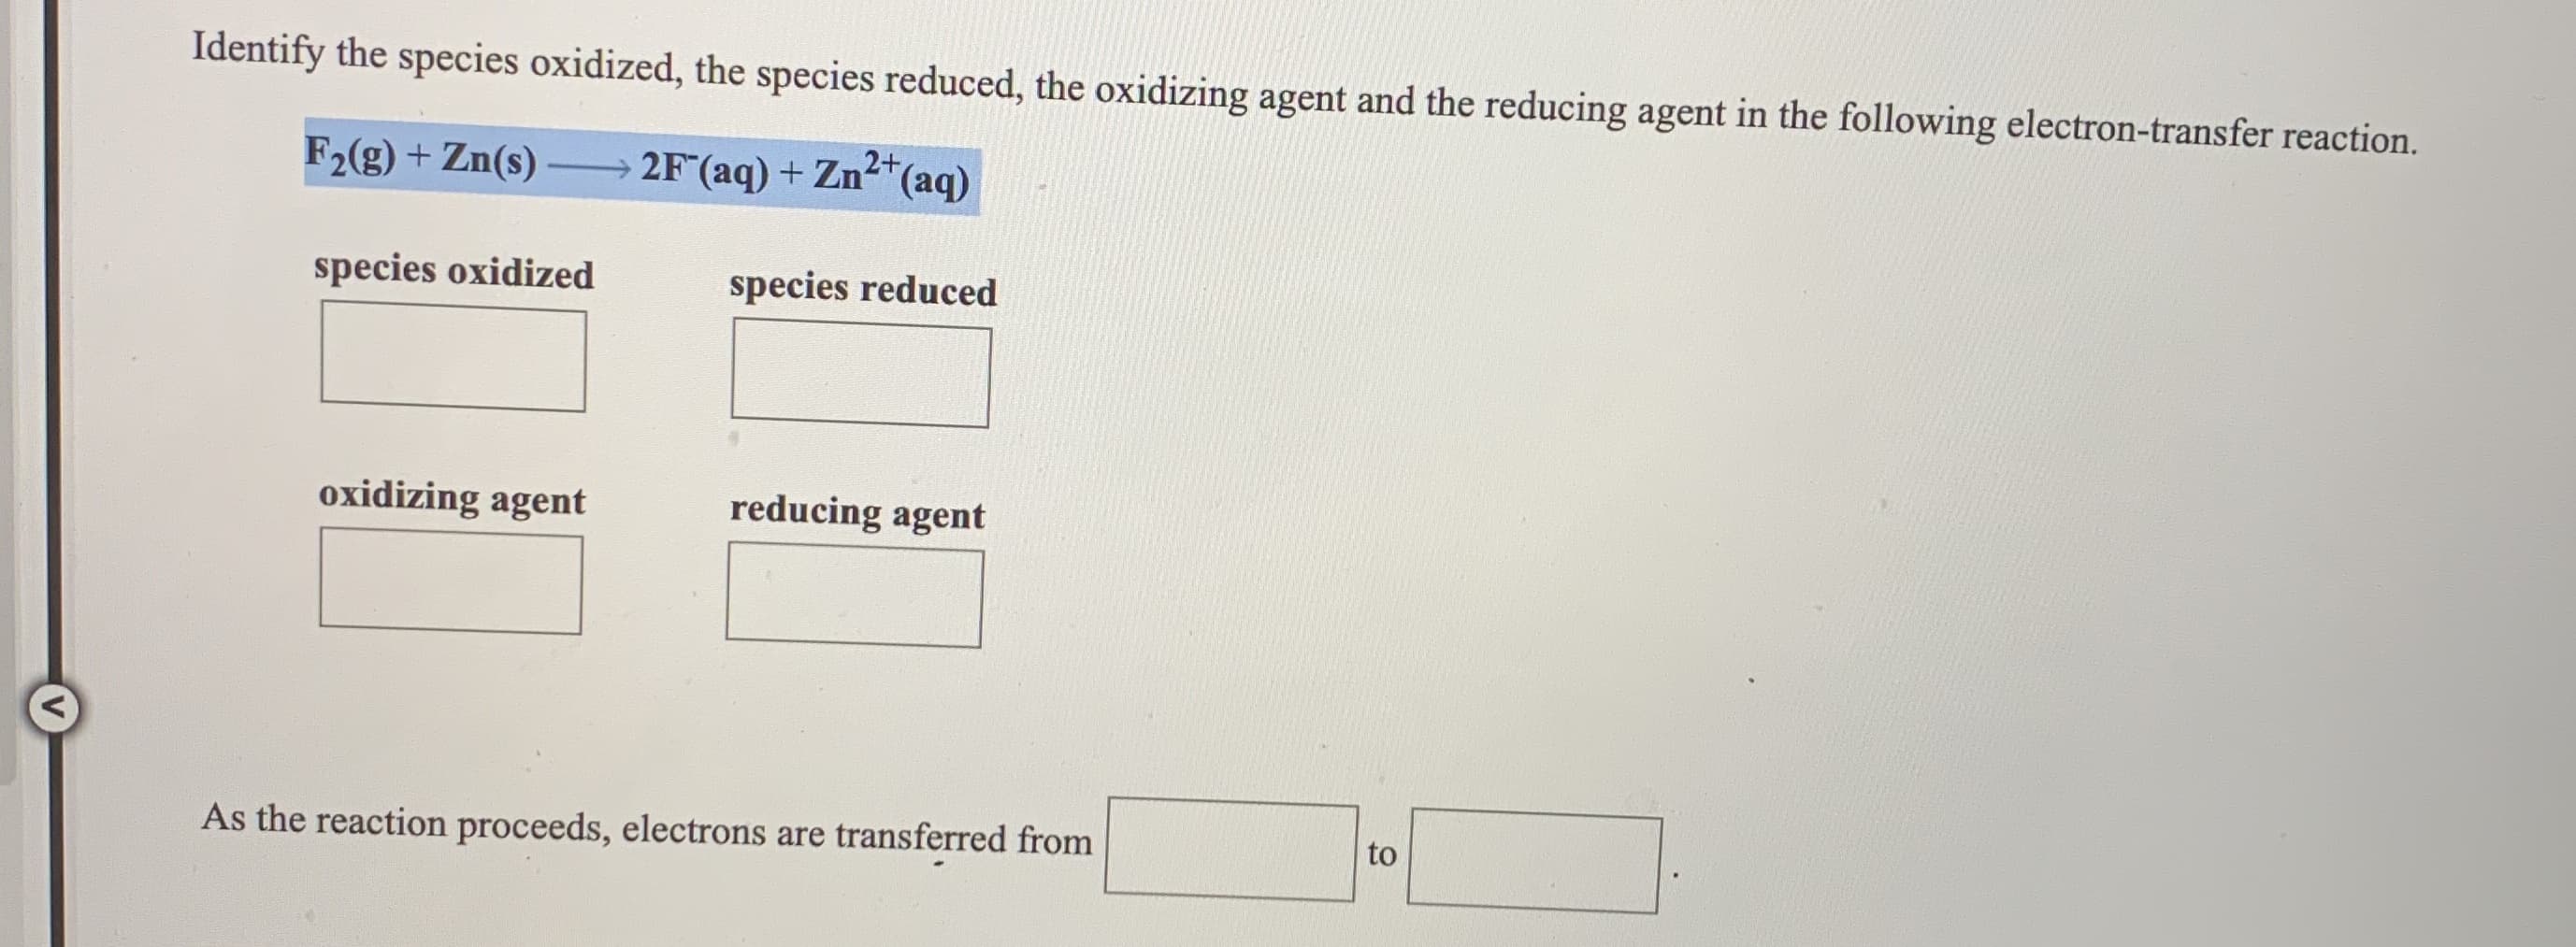 Identify the species oxidized, the species reduced, the oxidizing agent and the reducing agent in the following electron-transfer reaction.
F2(g) + Zn(s)
2F (aq) + Zn2+(aq)
species oxidized
species reduced
oxidizing agent
reducing agent
As the reaction proceeds, electrons are transferred from
to
